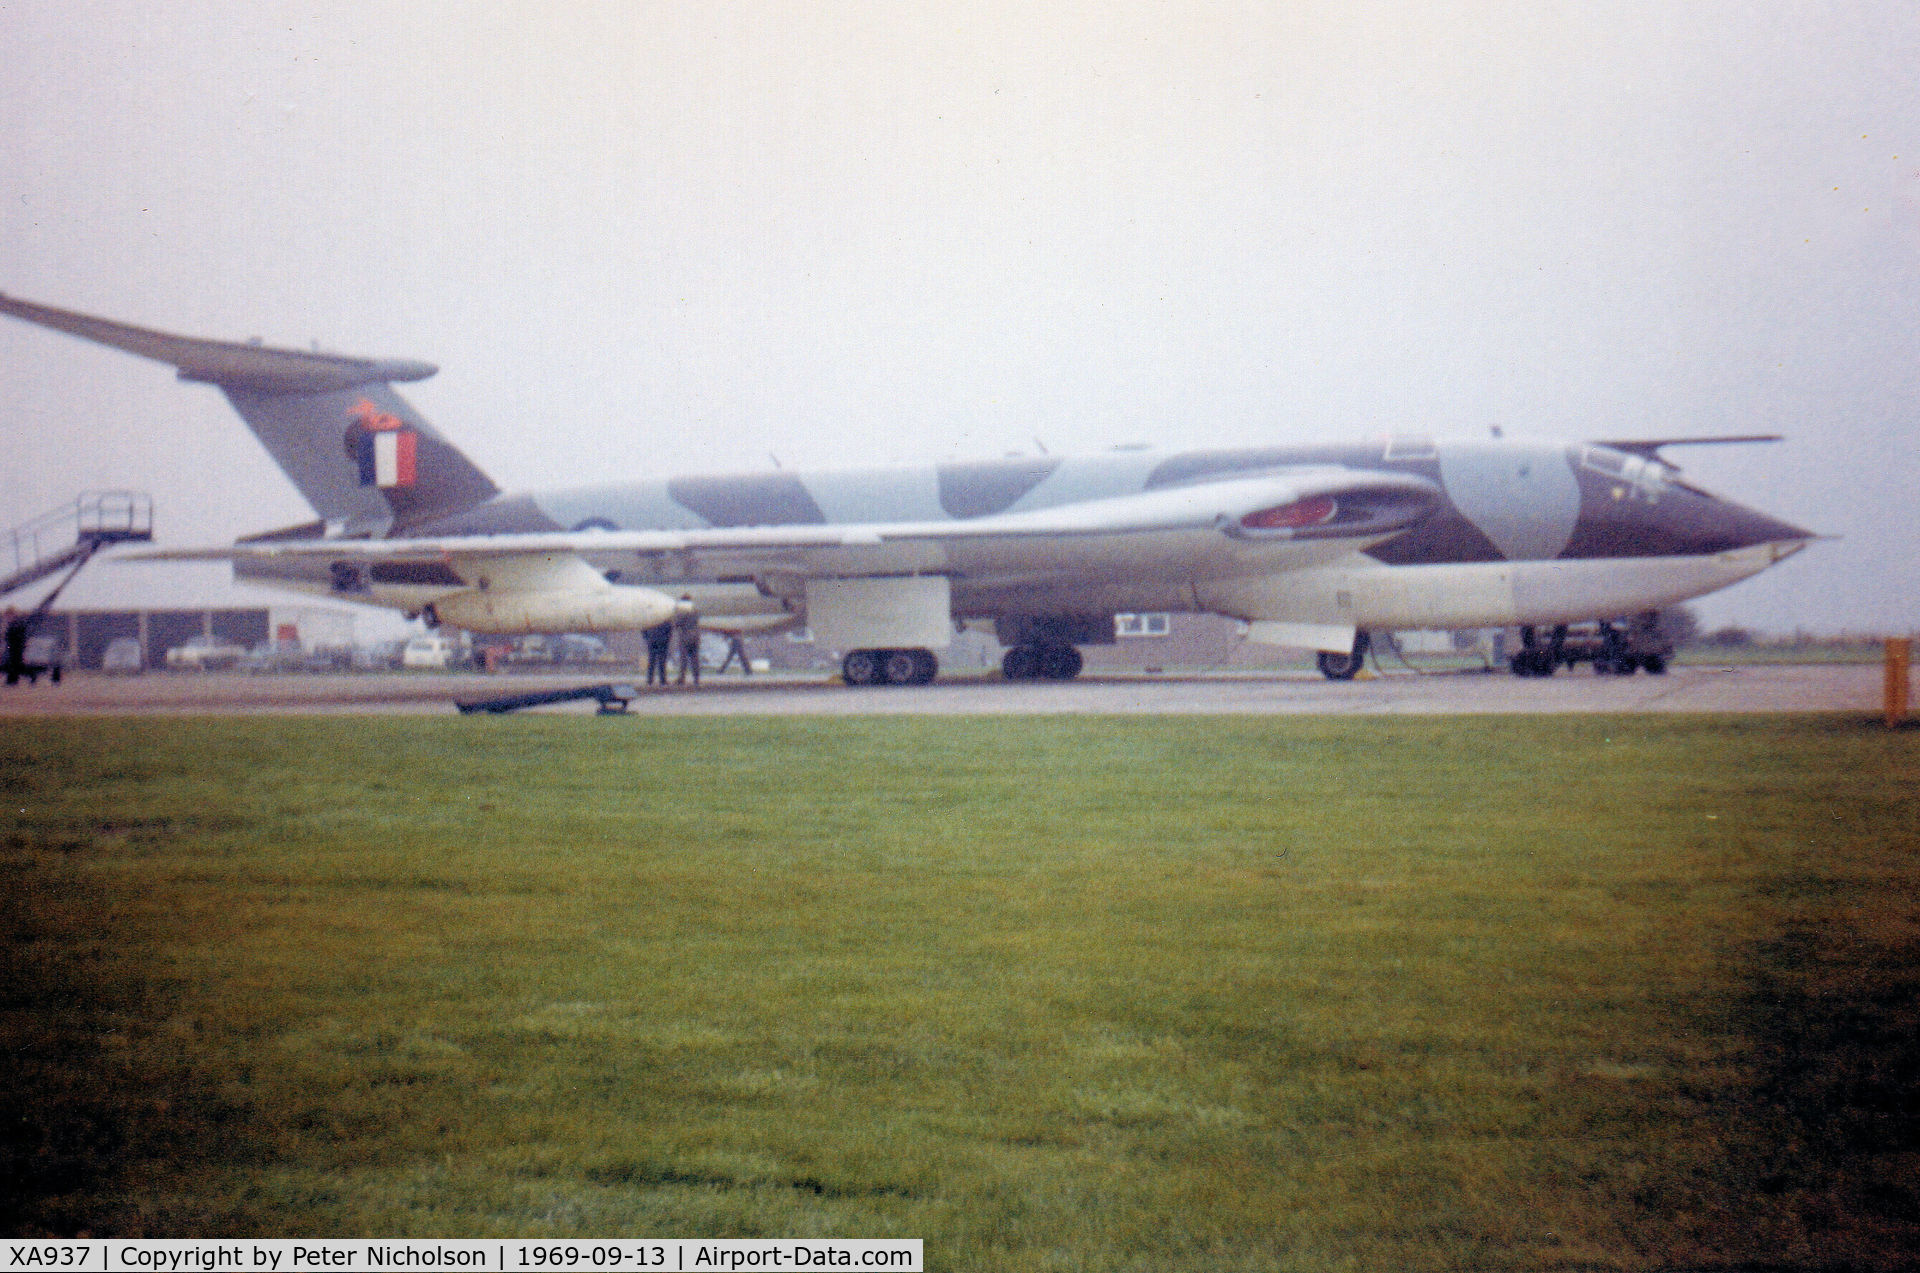 XA937, 1958 Handley Page Victor K.1A C/N HP80/23, Victor K.1A of 214 Squadron on display at the 1968 RAF Finningley Battle of Britain Airshow.